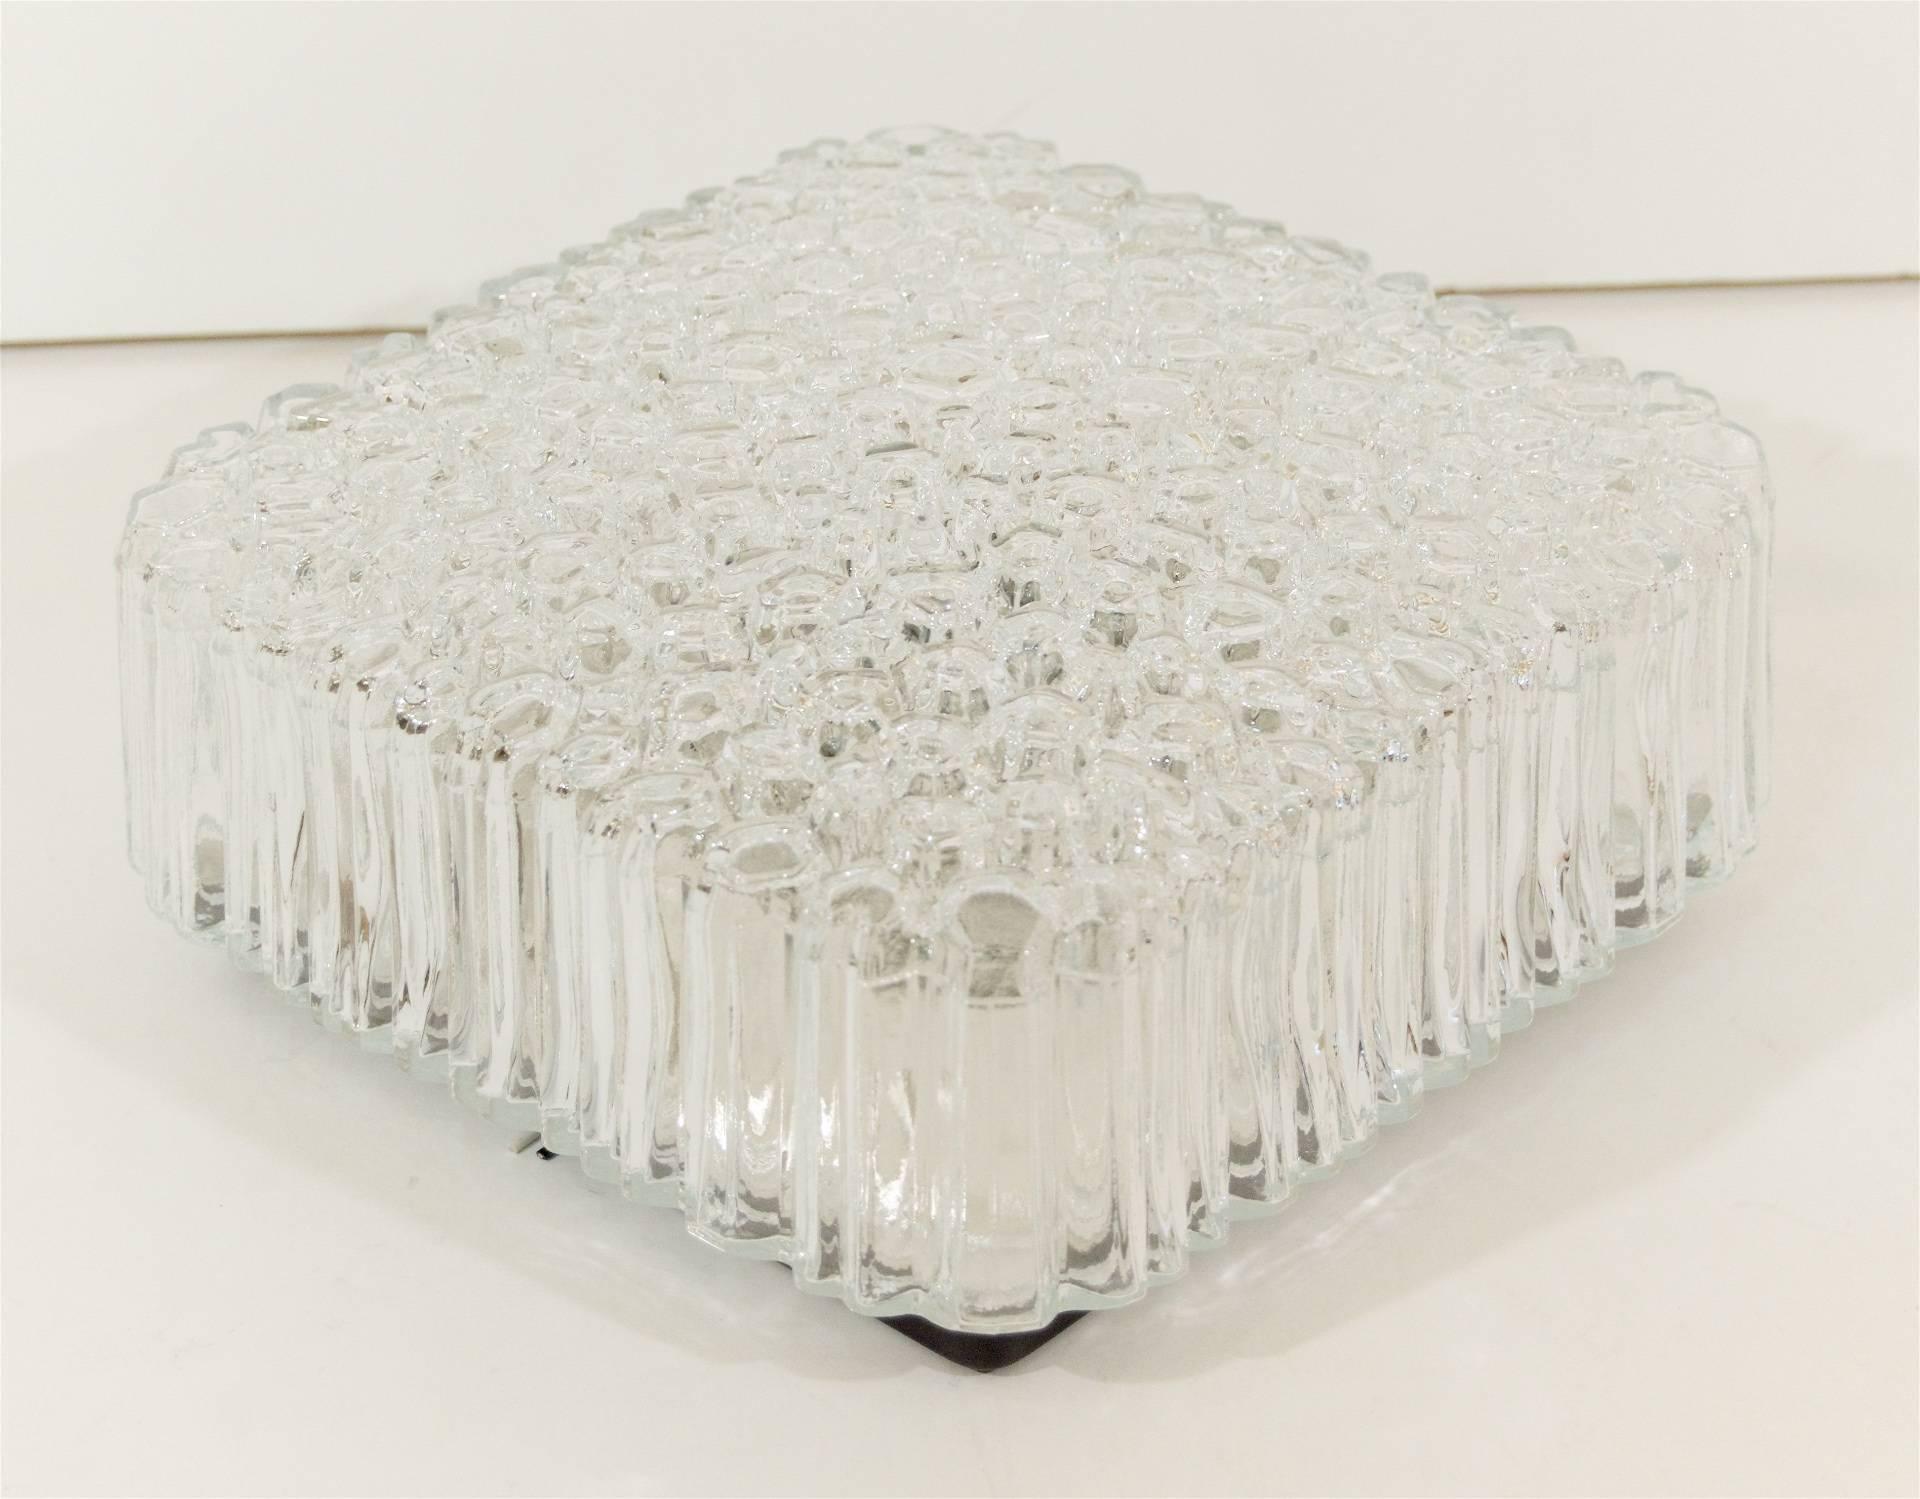 Beautiful glass flush mount has a raised etched glass bubble pattern with singular cuts on the side to create a linear pattern. 

Takes one medium base bulb up to 60 watts per bulb, new wiring.